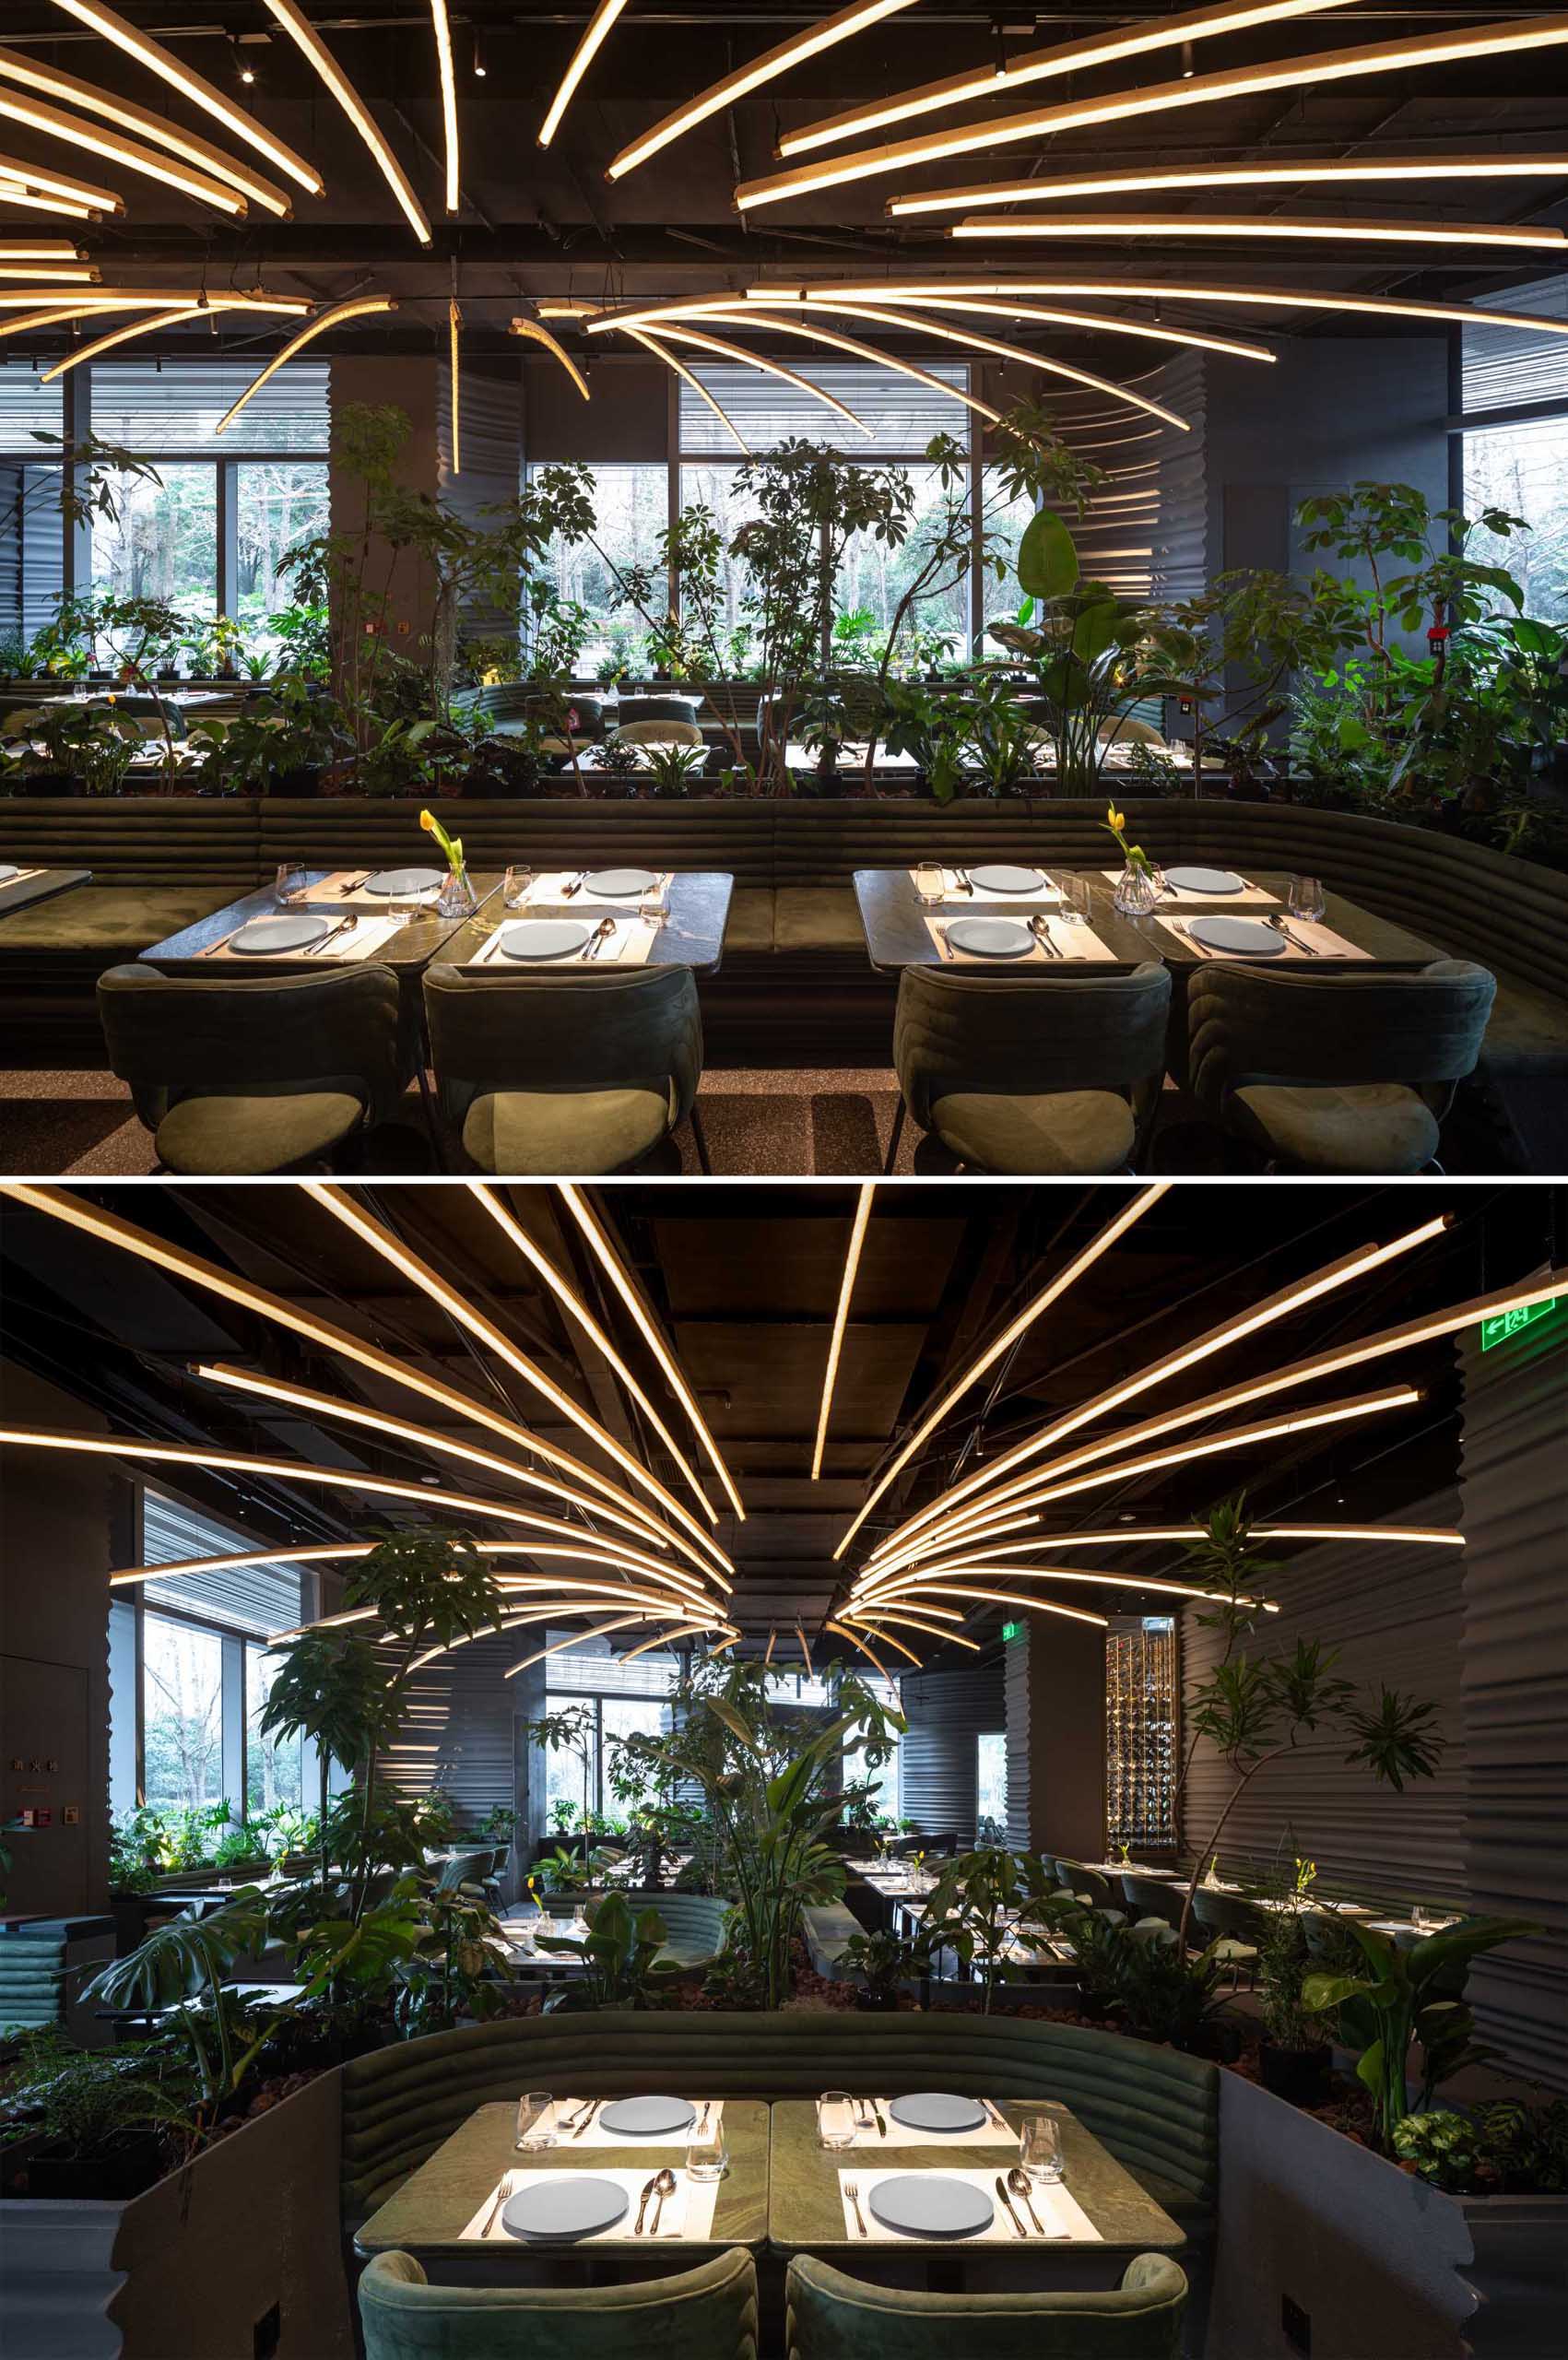 The large lighting installation above the main dining area of this modern restaurant was inspired by the sparkling embers of a firewood flame.